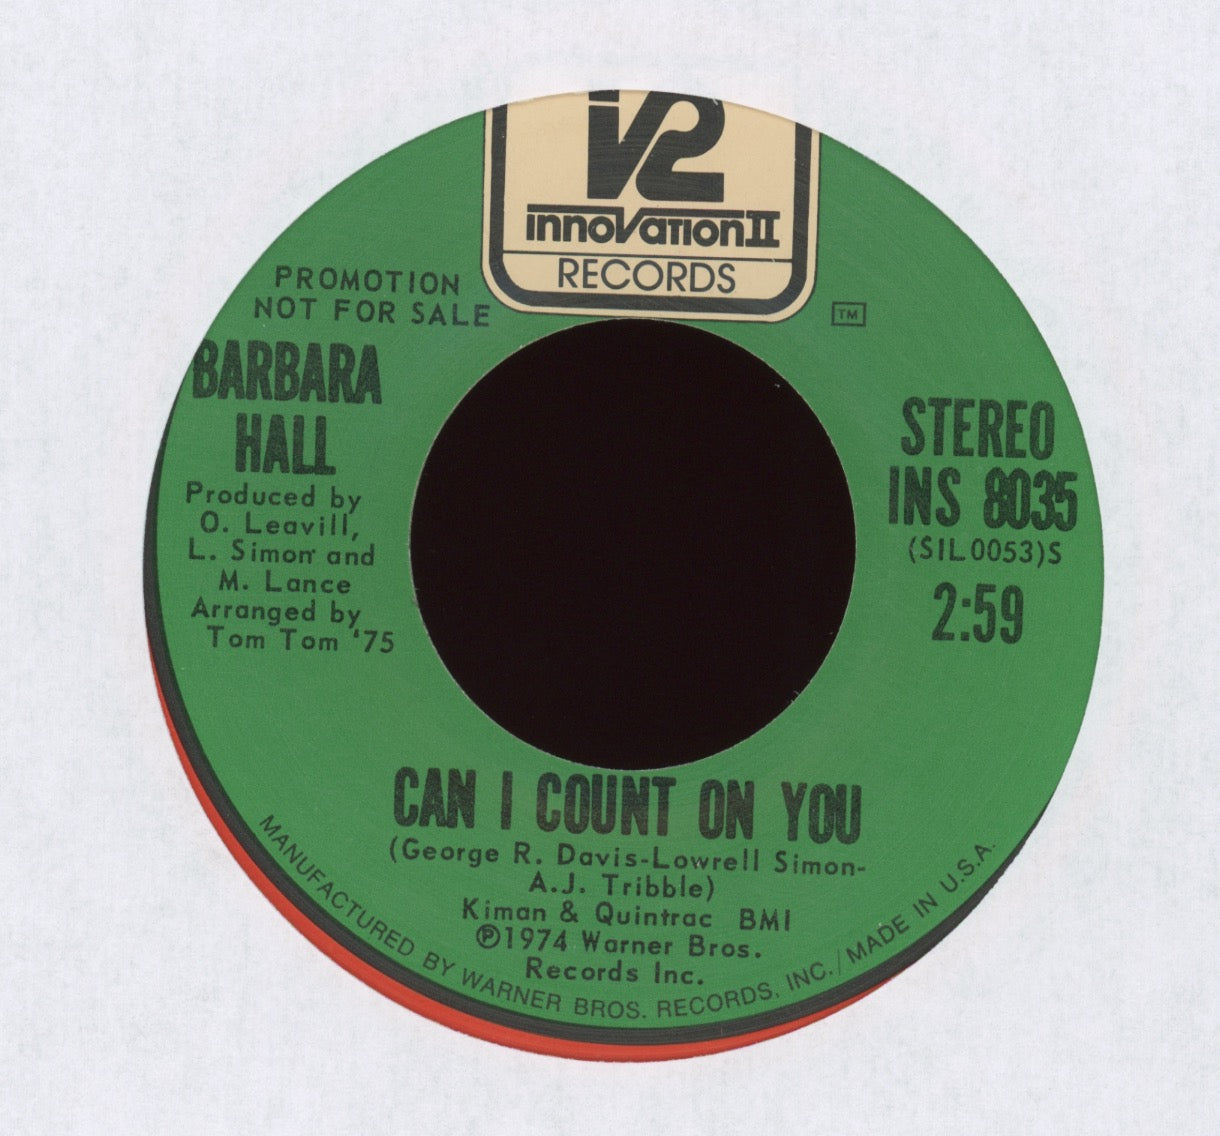 Barbara Hall - Can I Count On You on Innovation II Promo